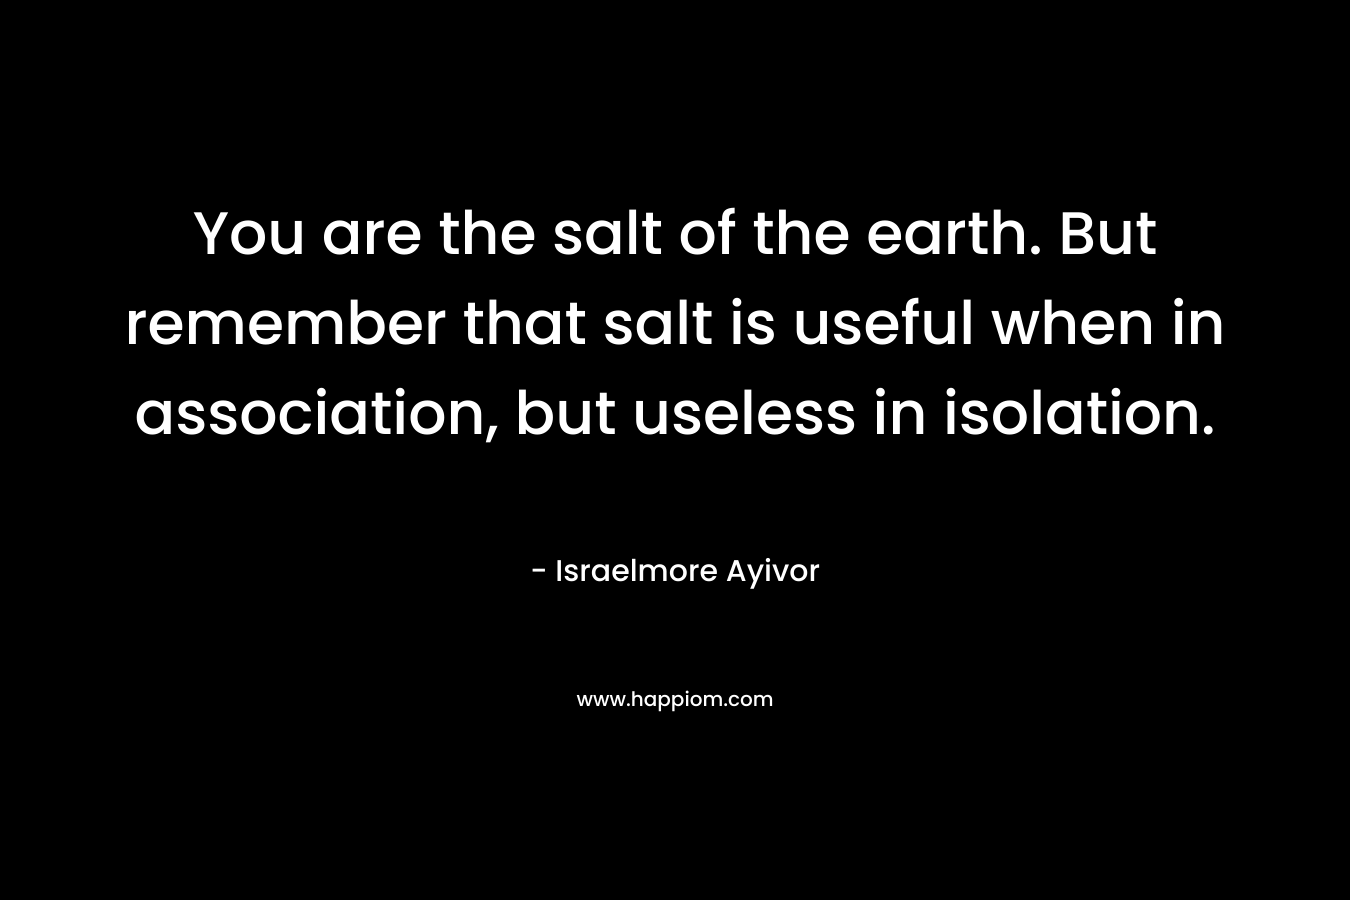 You are the salt of the earth. But remember that salt is useful when in association, but useless in isolation.